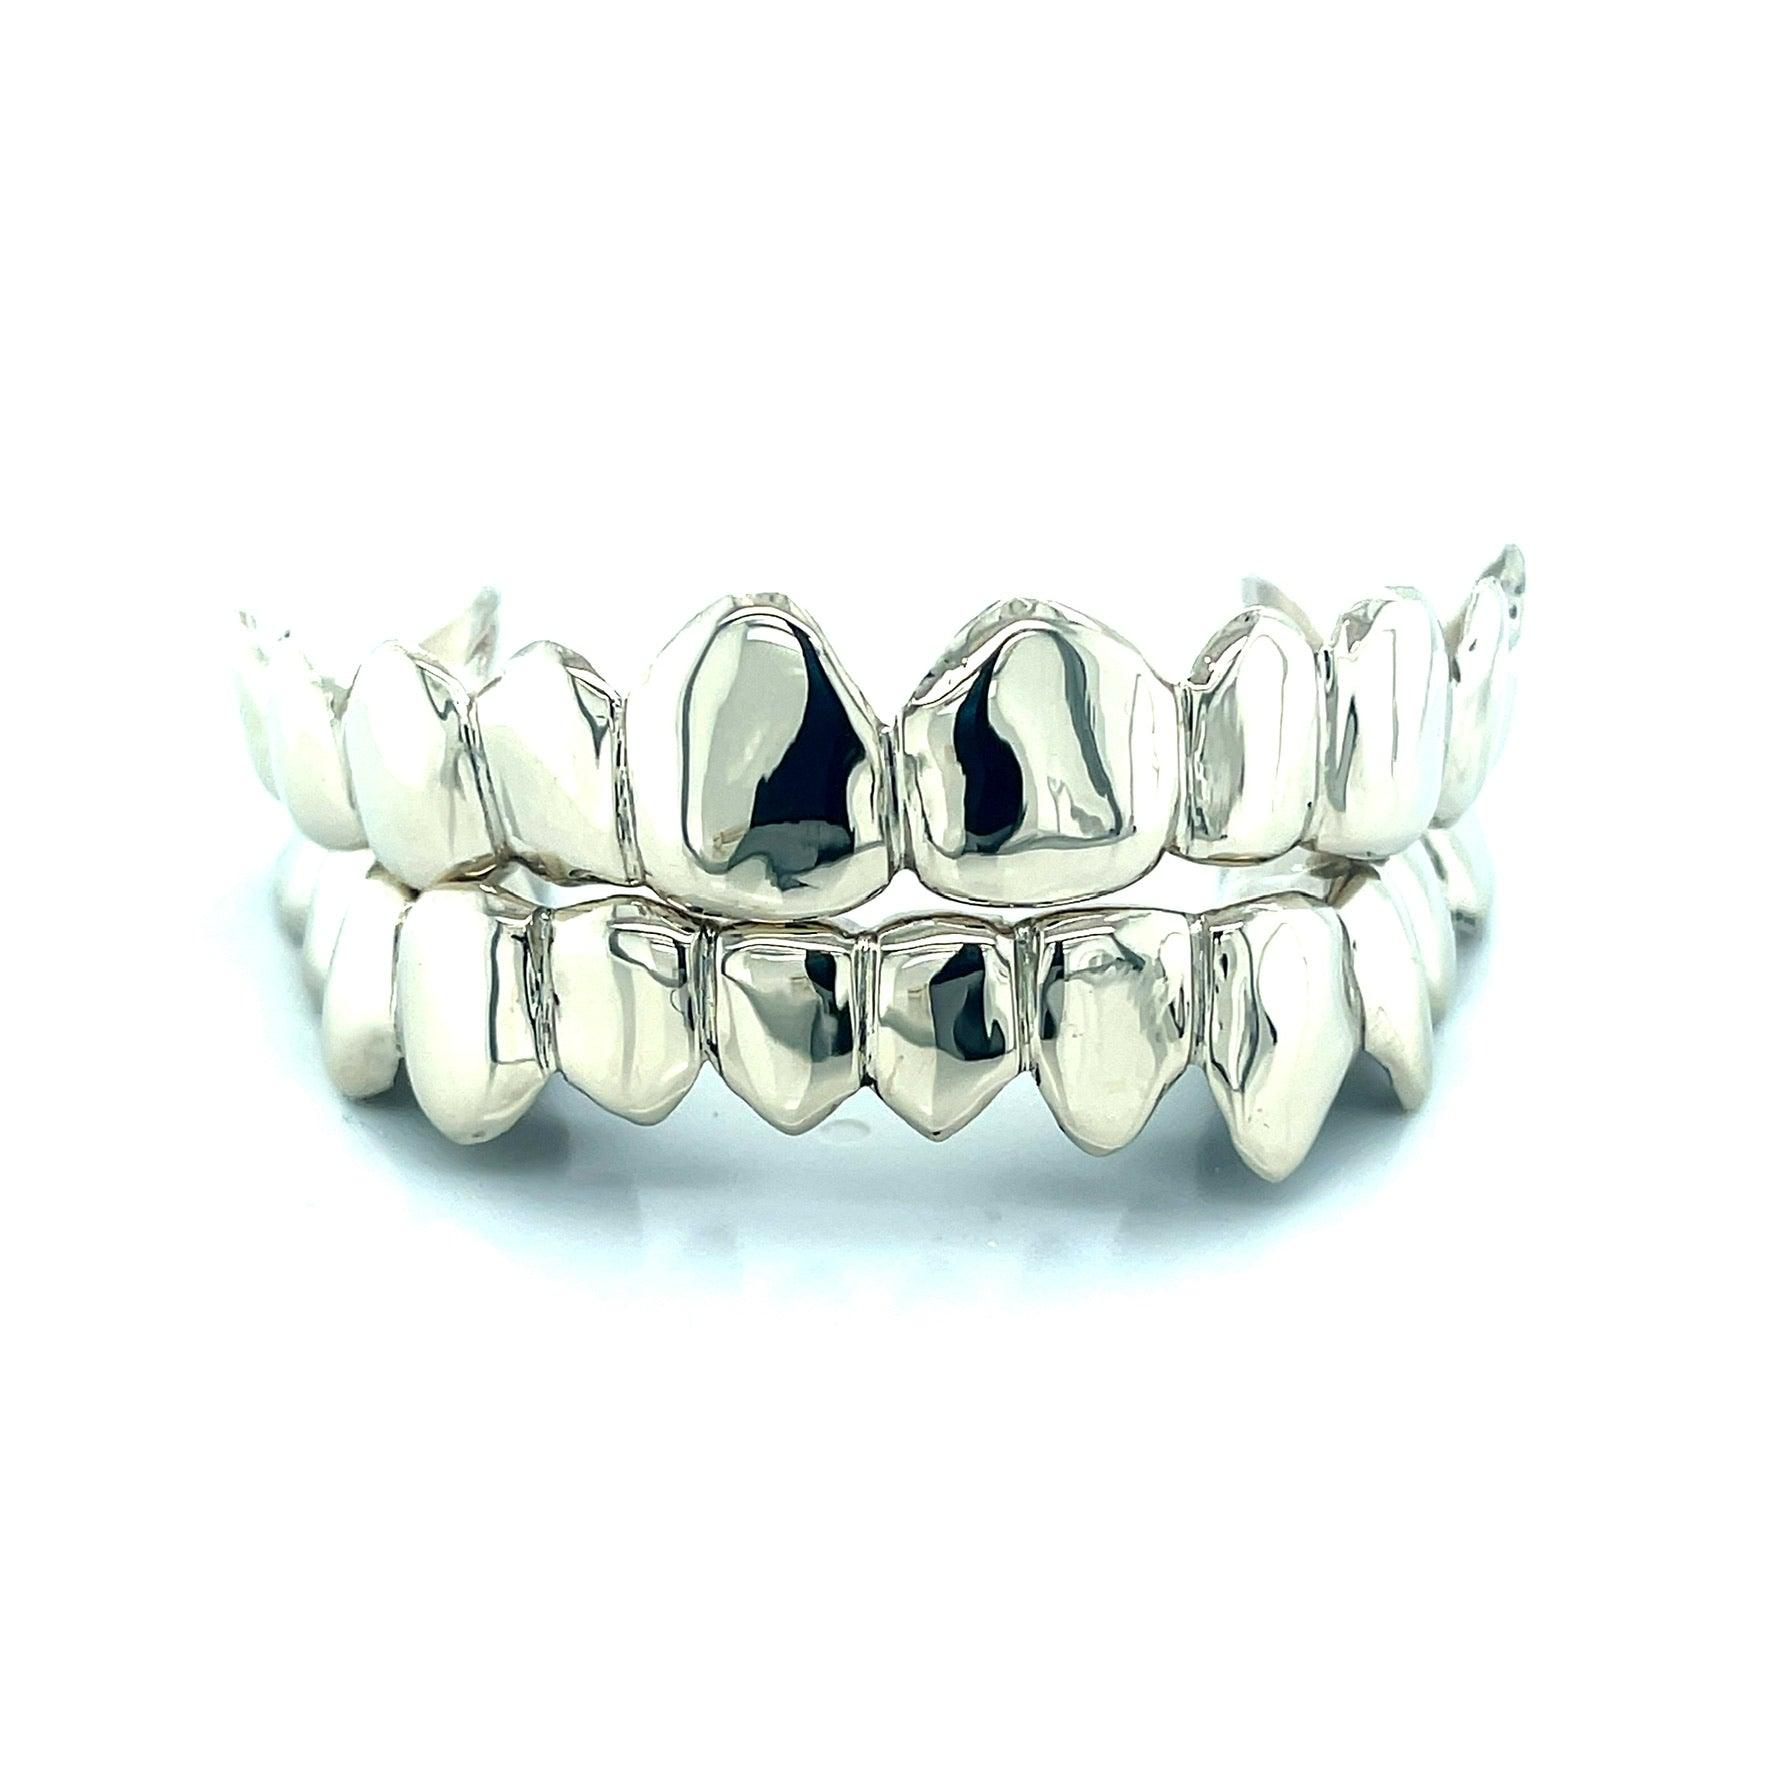 24pc White Gold High Polished Grillz - Seattle Gold Grillz